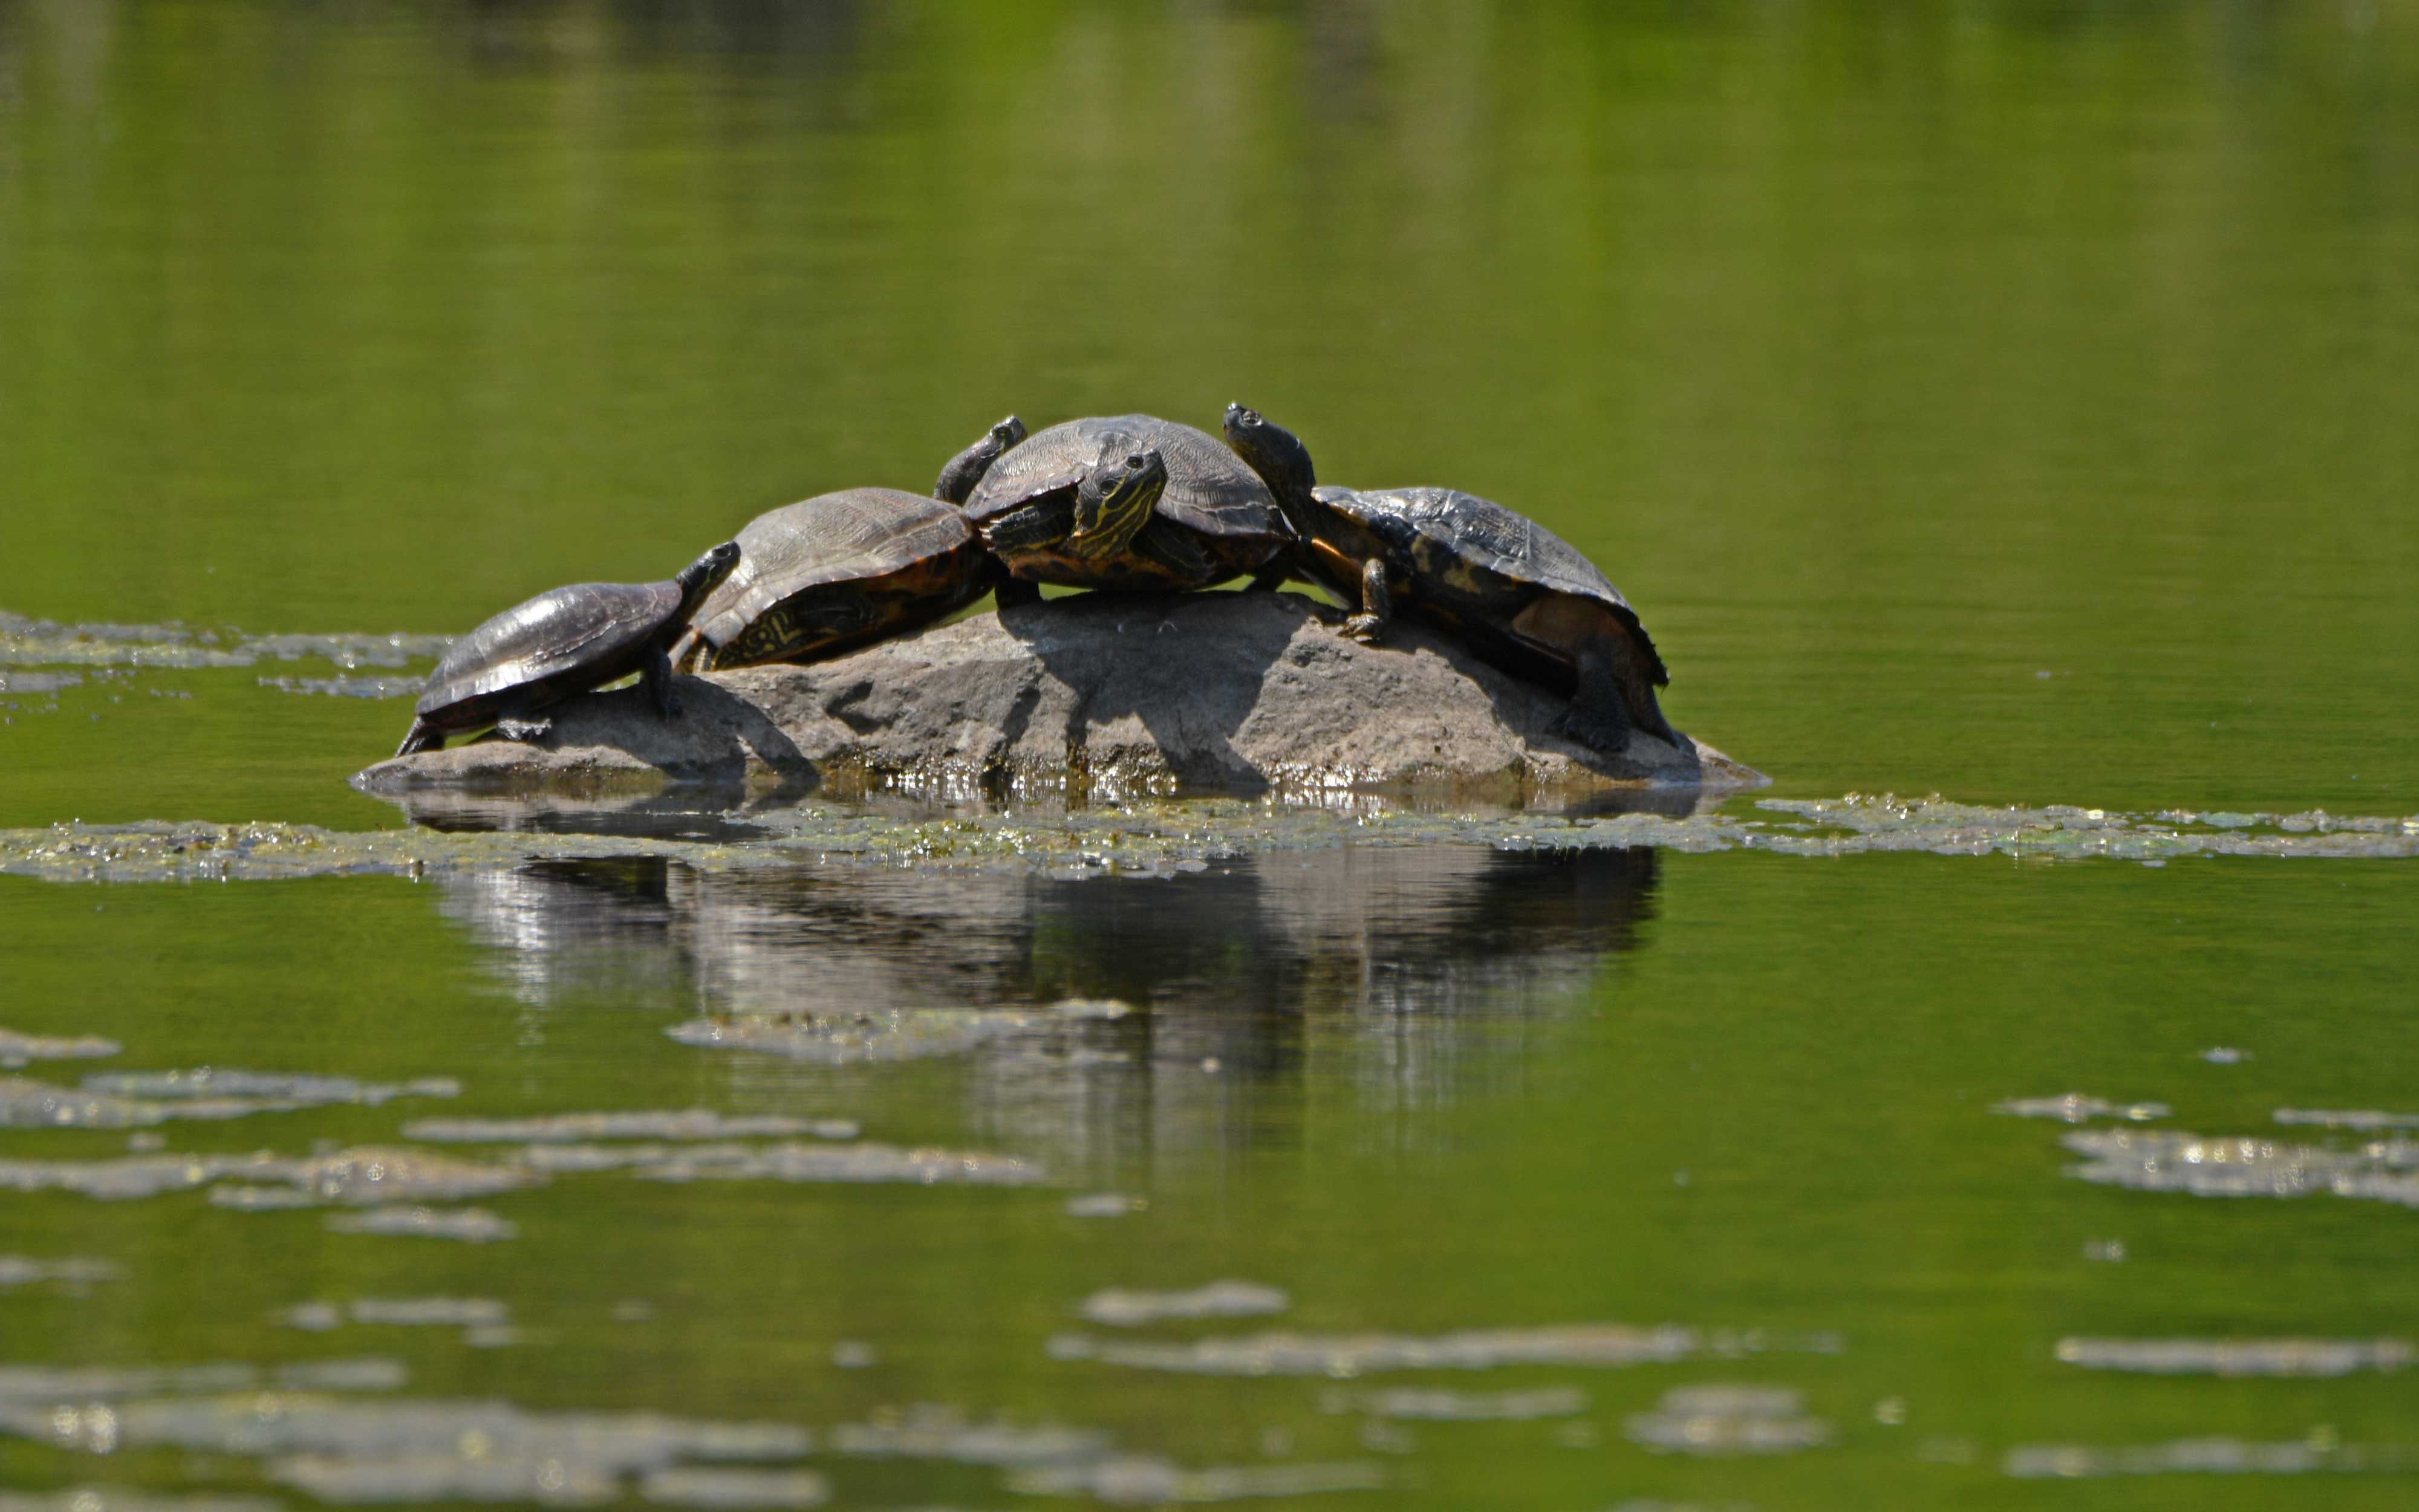 A group of painted turtles sunbathing on a rock.